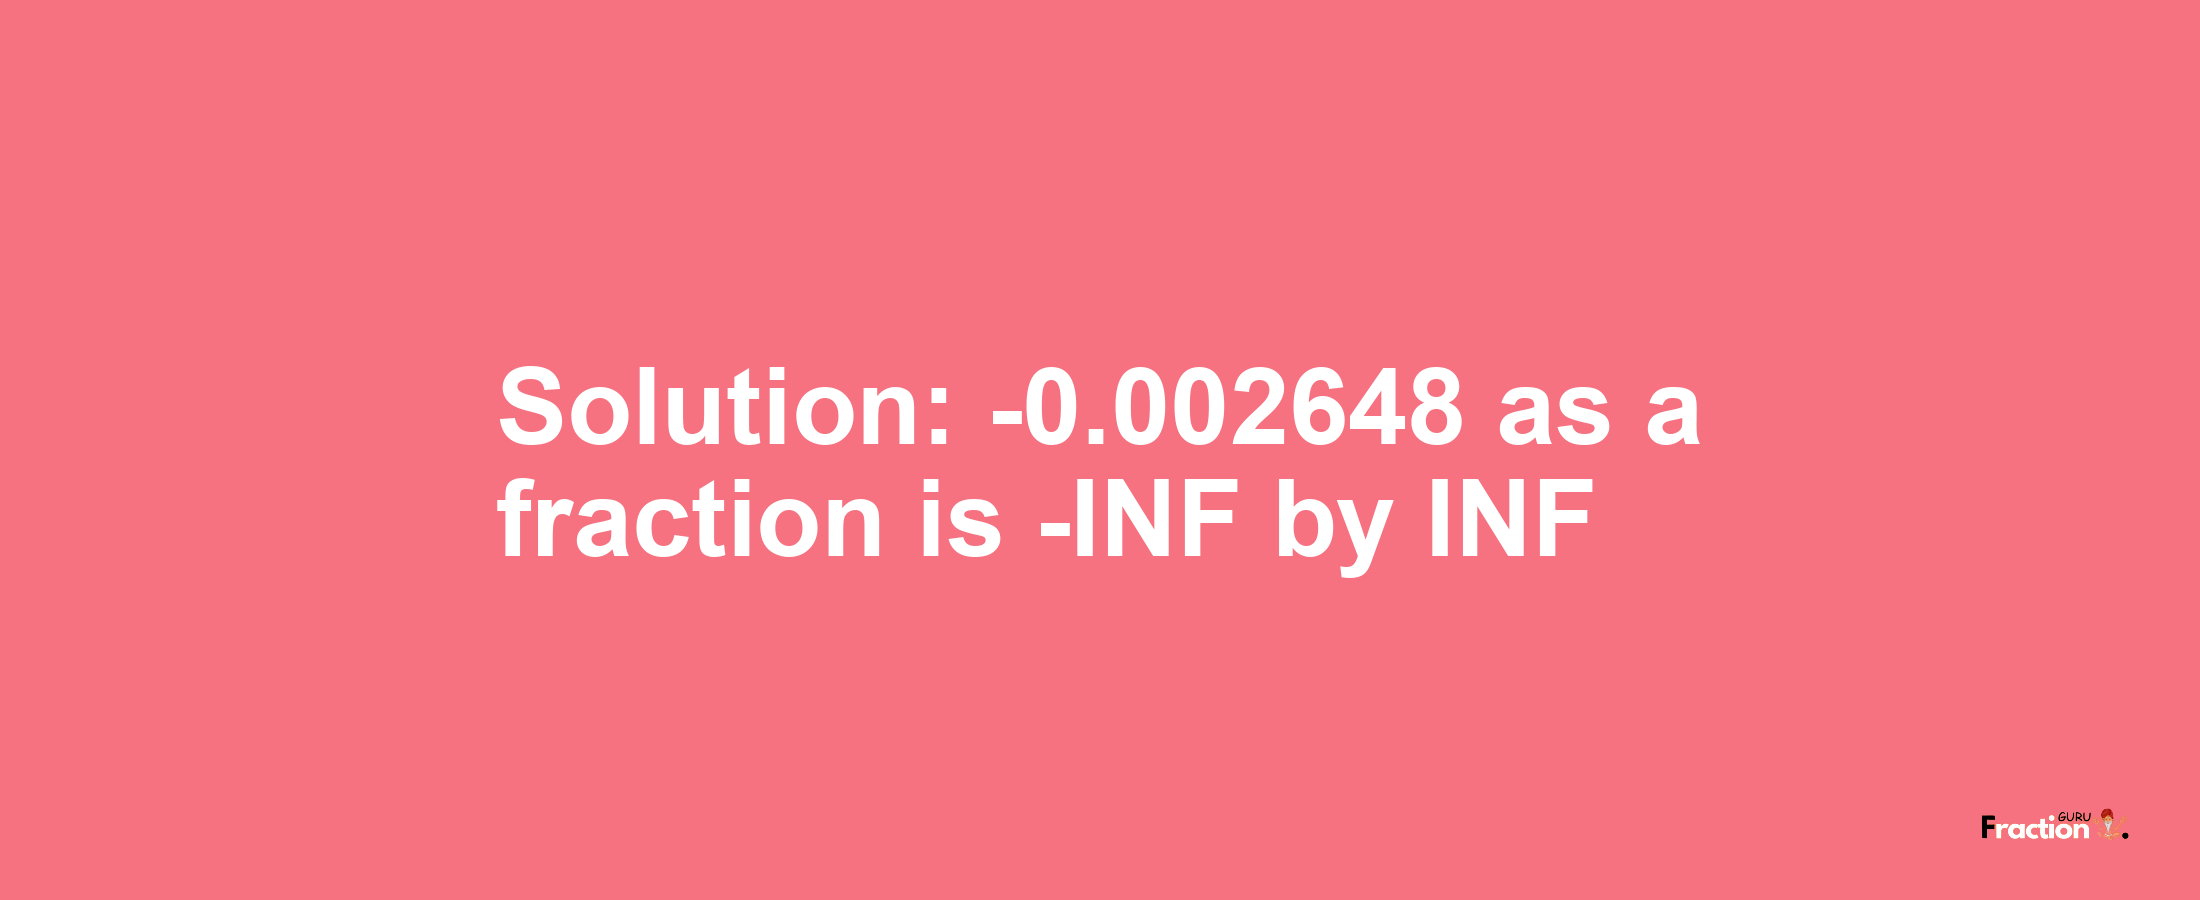 Solution:-0.002648 as a fraction is -INF/INF